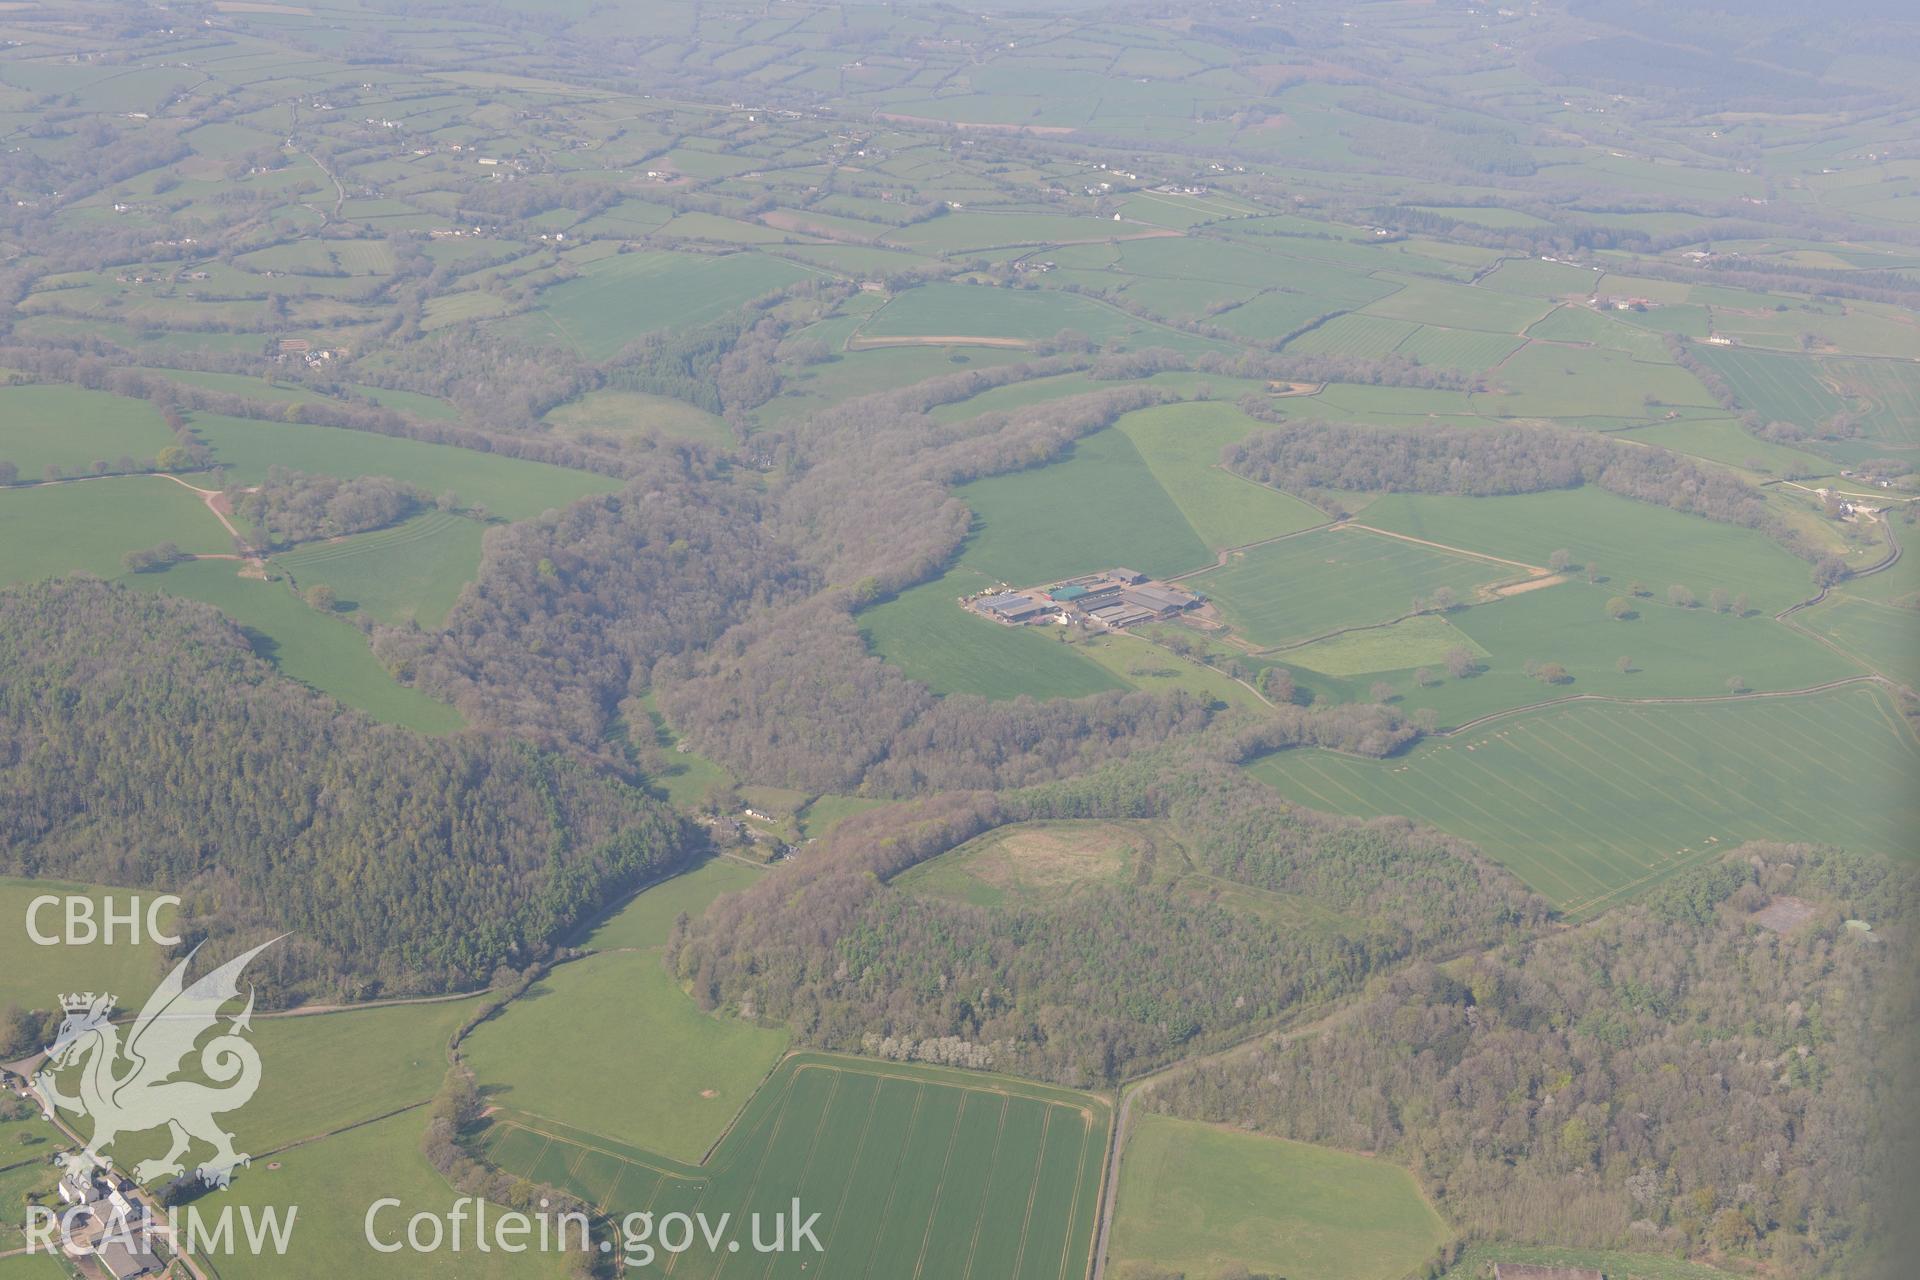 Great Llanmelin, Llanmelin Wood Hillfort and lesser enclosure, Cewre Quarry and Limekiln, Old Cwm Mill, Lower Cwm Mill and The Coombe Garden. Oblique aerial photograph taken during the Royal Commission's programme of archaeological aerial reconnaissance by Toby Driver on 21st April 2015